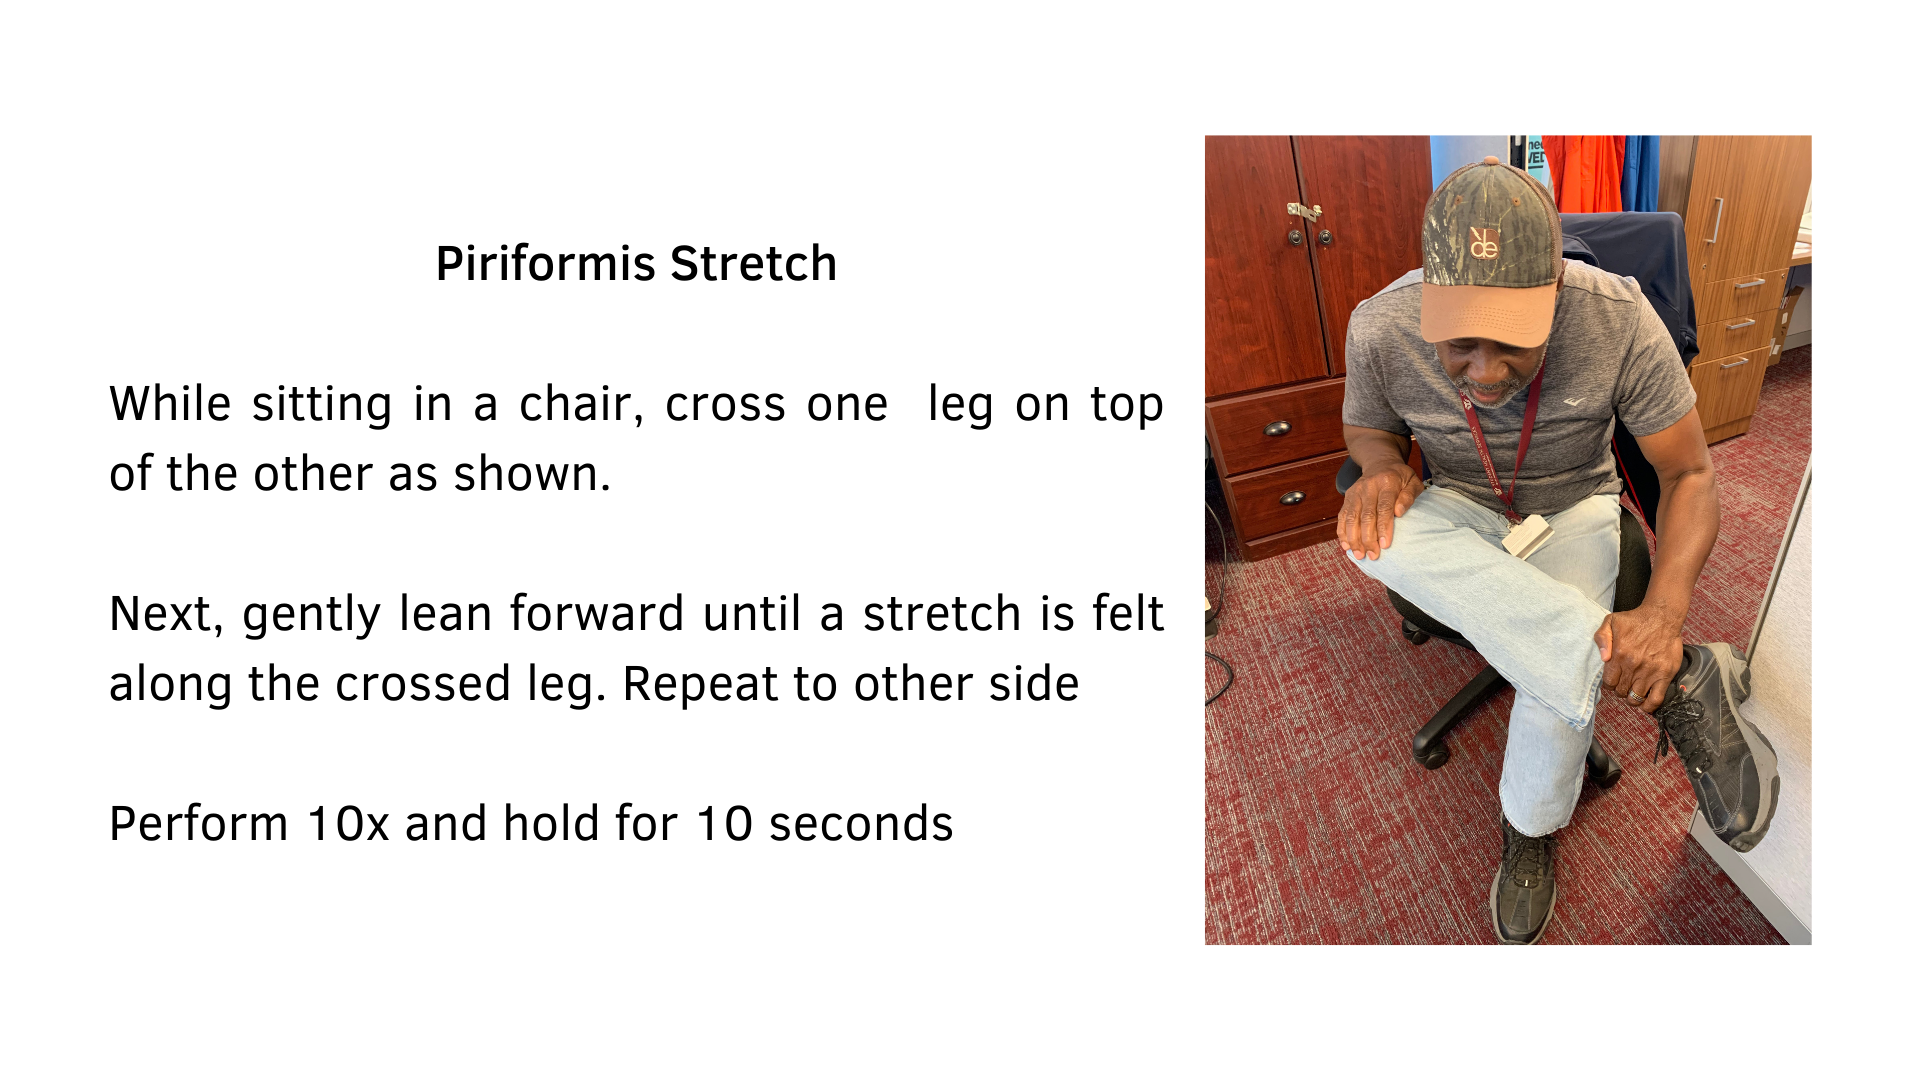 Black text on a white background that reads, "Piriformis Stretch: While sitting in a chair, cross one leg on top of the other as shown. Next, gently lean forward until a stretch is felt along the crossed leg. Repeat to the other side. Perform 10x and hold for 10 seconds." A photograph of a man sitting in a chair performing the stretch is included on the right side.